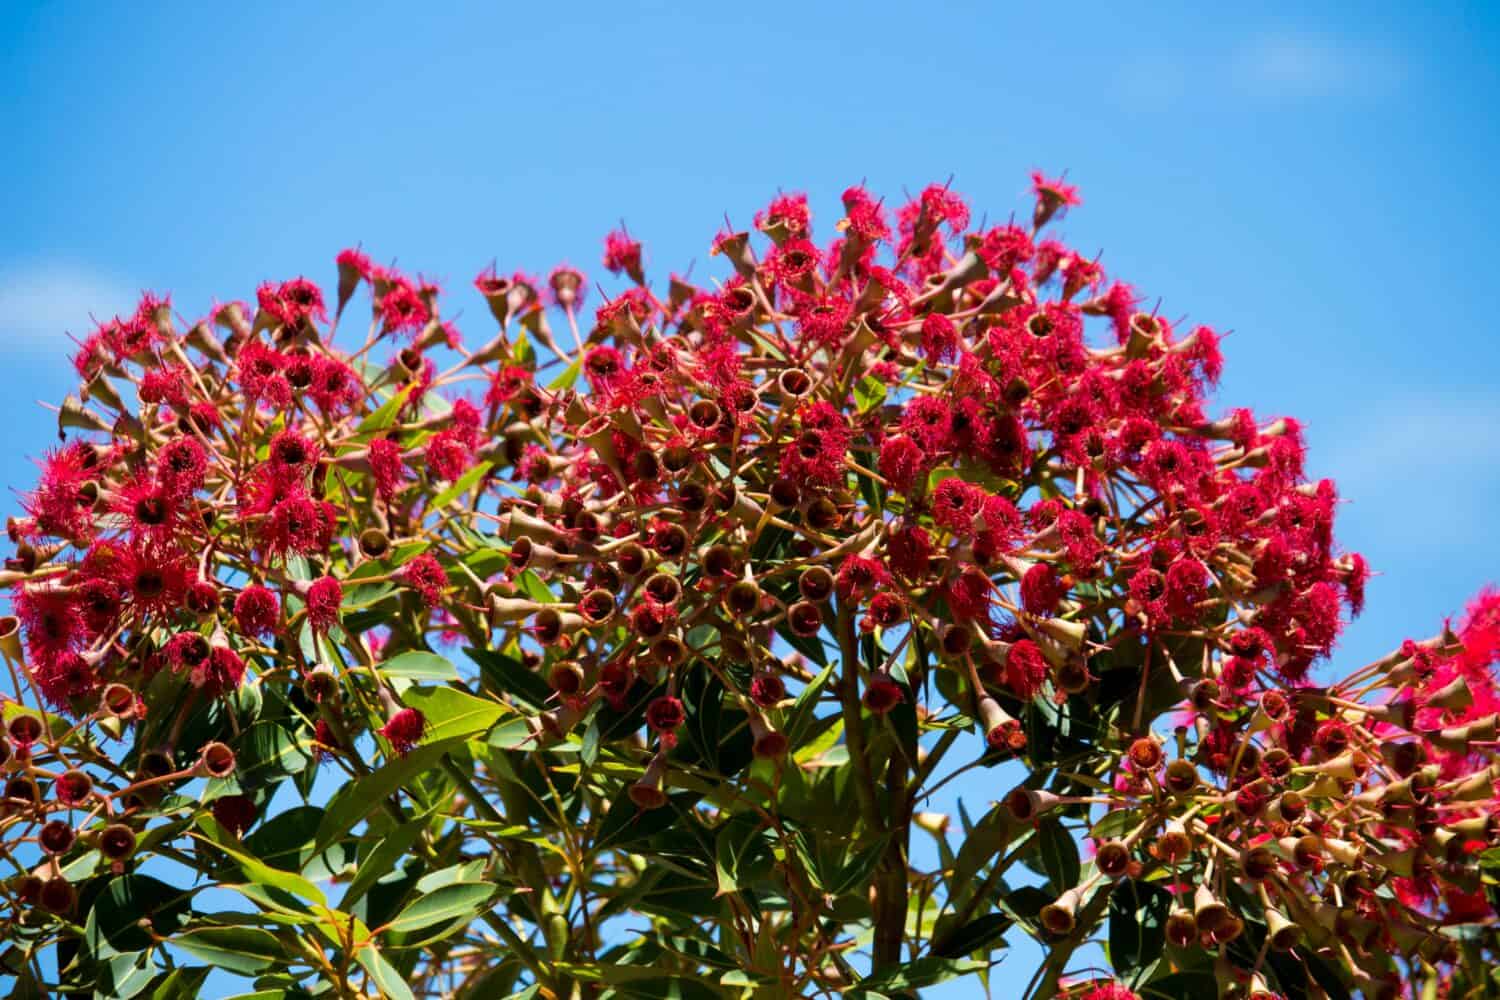 Brilliant red Blossoms of ornamental  Eucalyptus ficifolia West Australian scarlet flowering gum tree in early summer attracts native birds and honey bees to the sweet nectar.